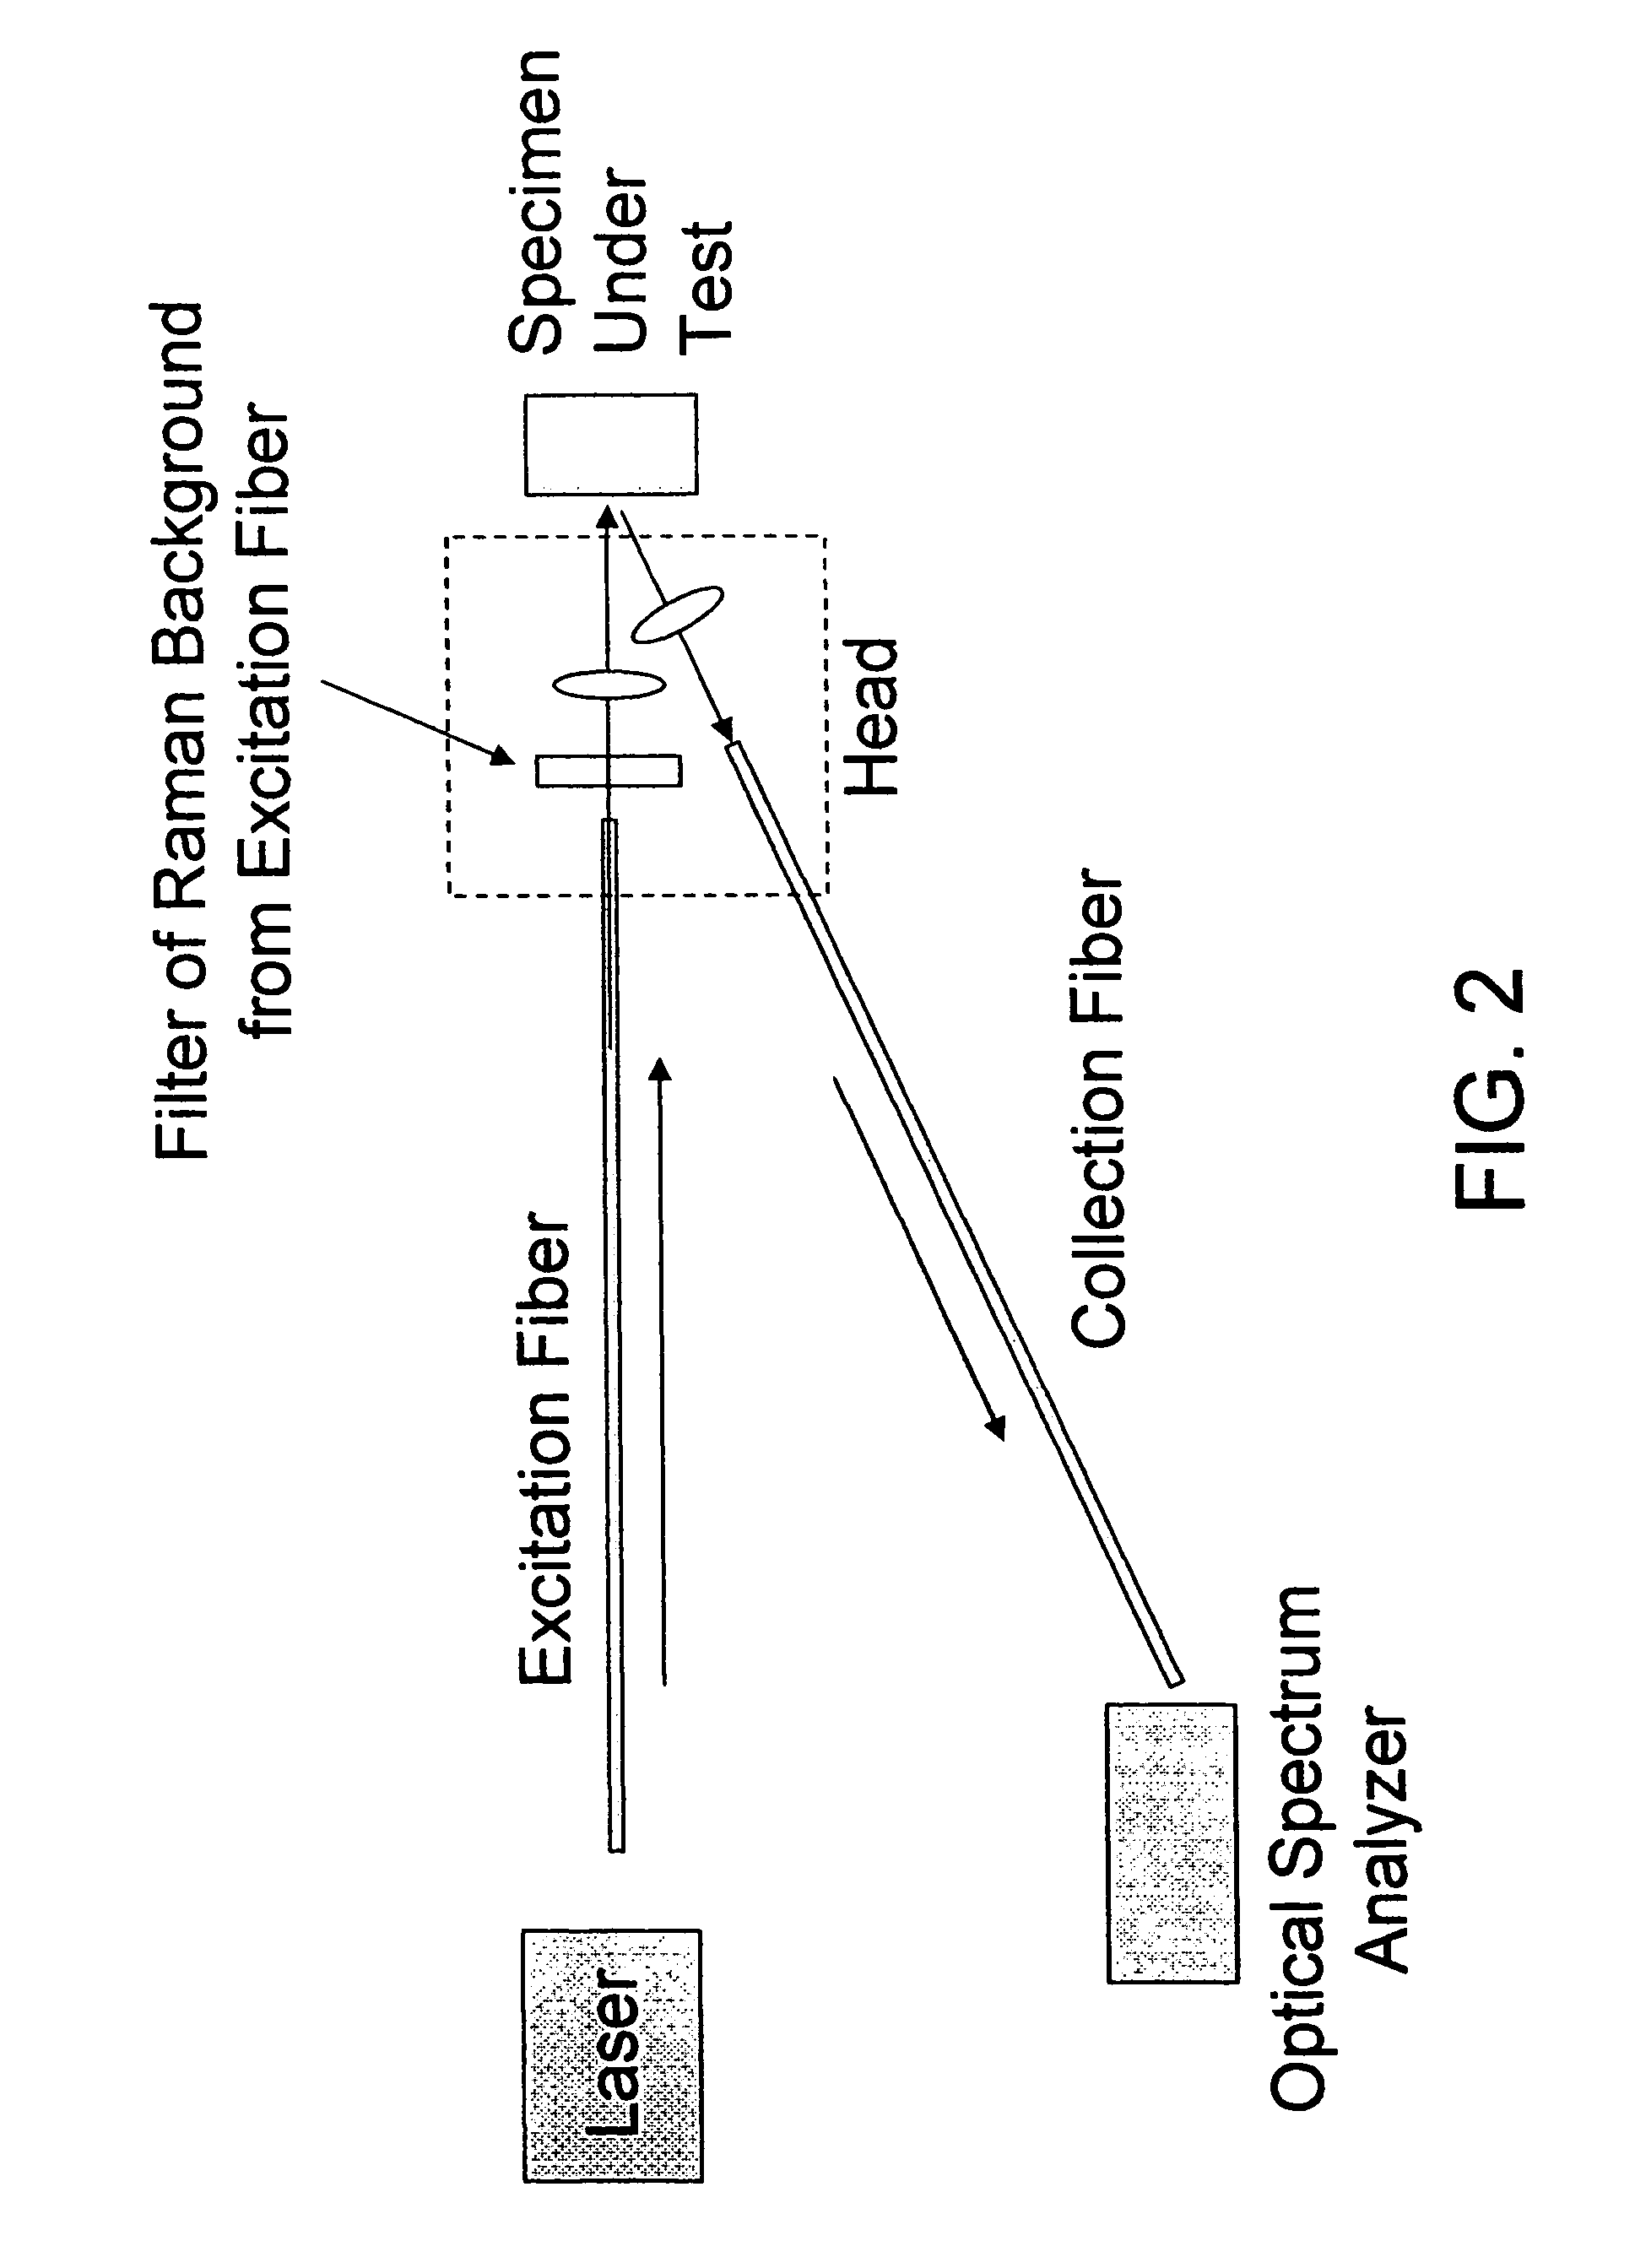 Method and apparatus for conducting RAMAN spectroscopy using a remote optical probe